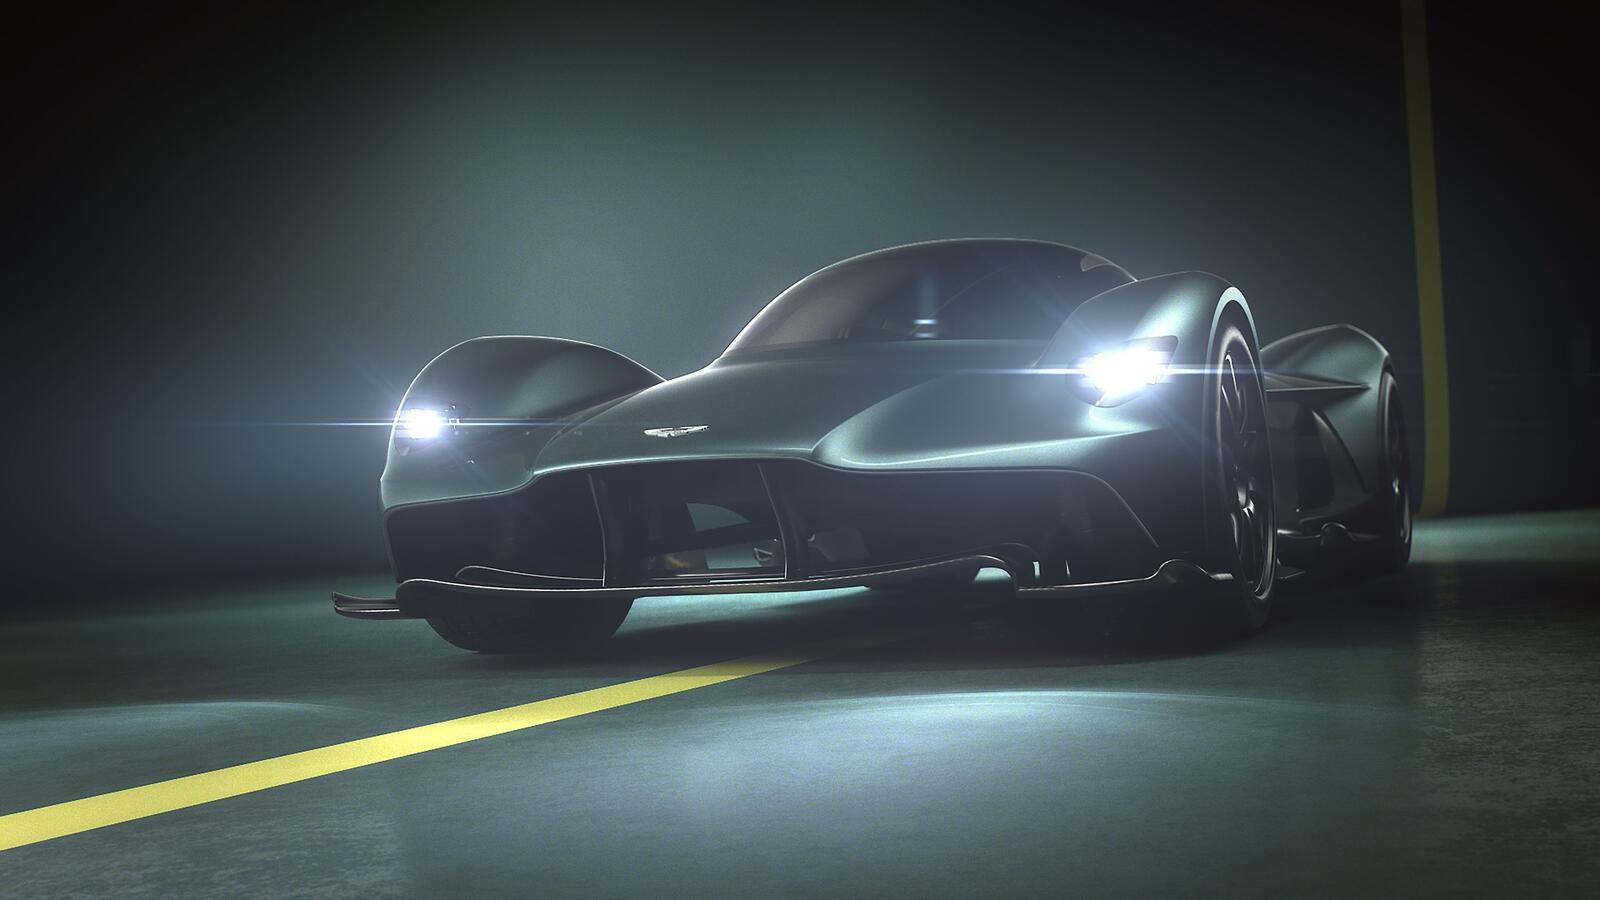 Wallpapers aston martin valkyrie black front view on the desktop